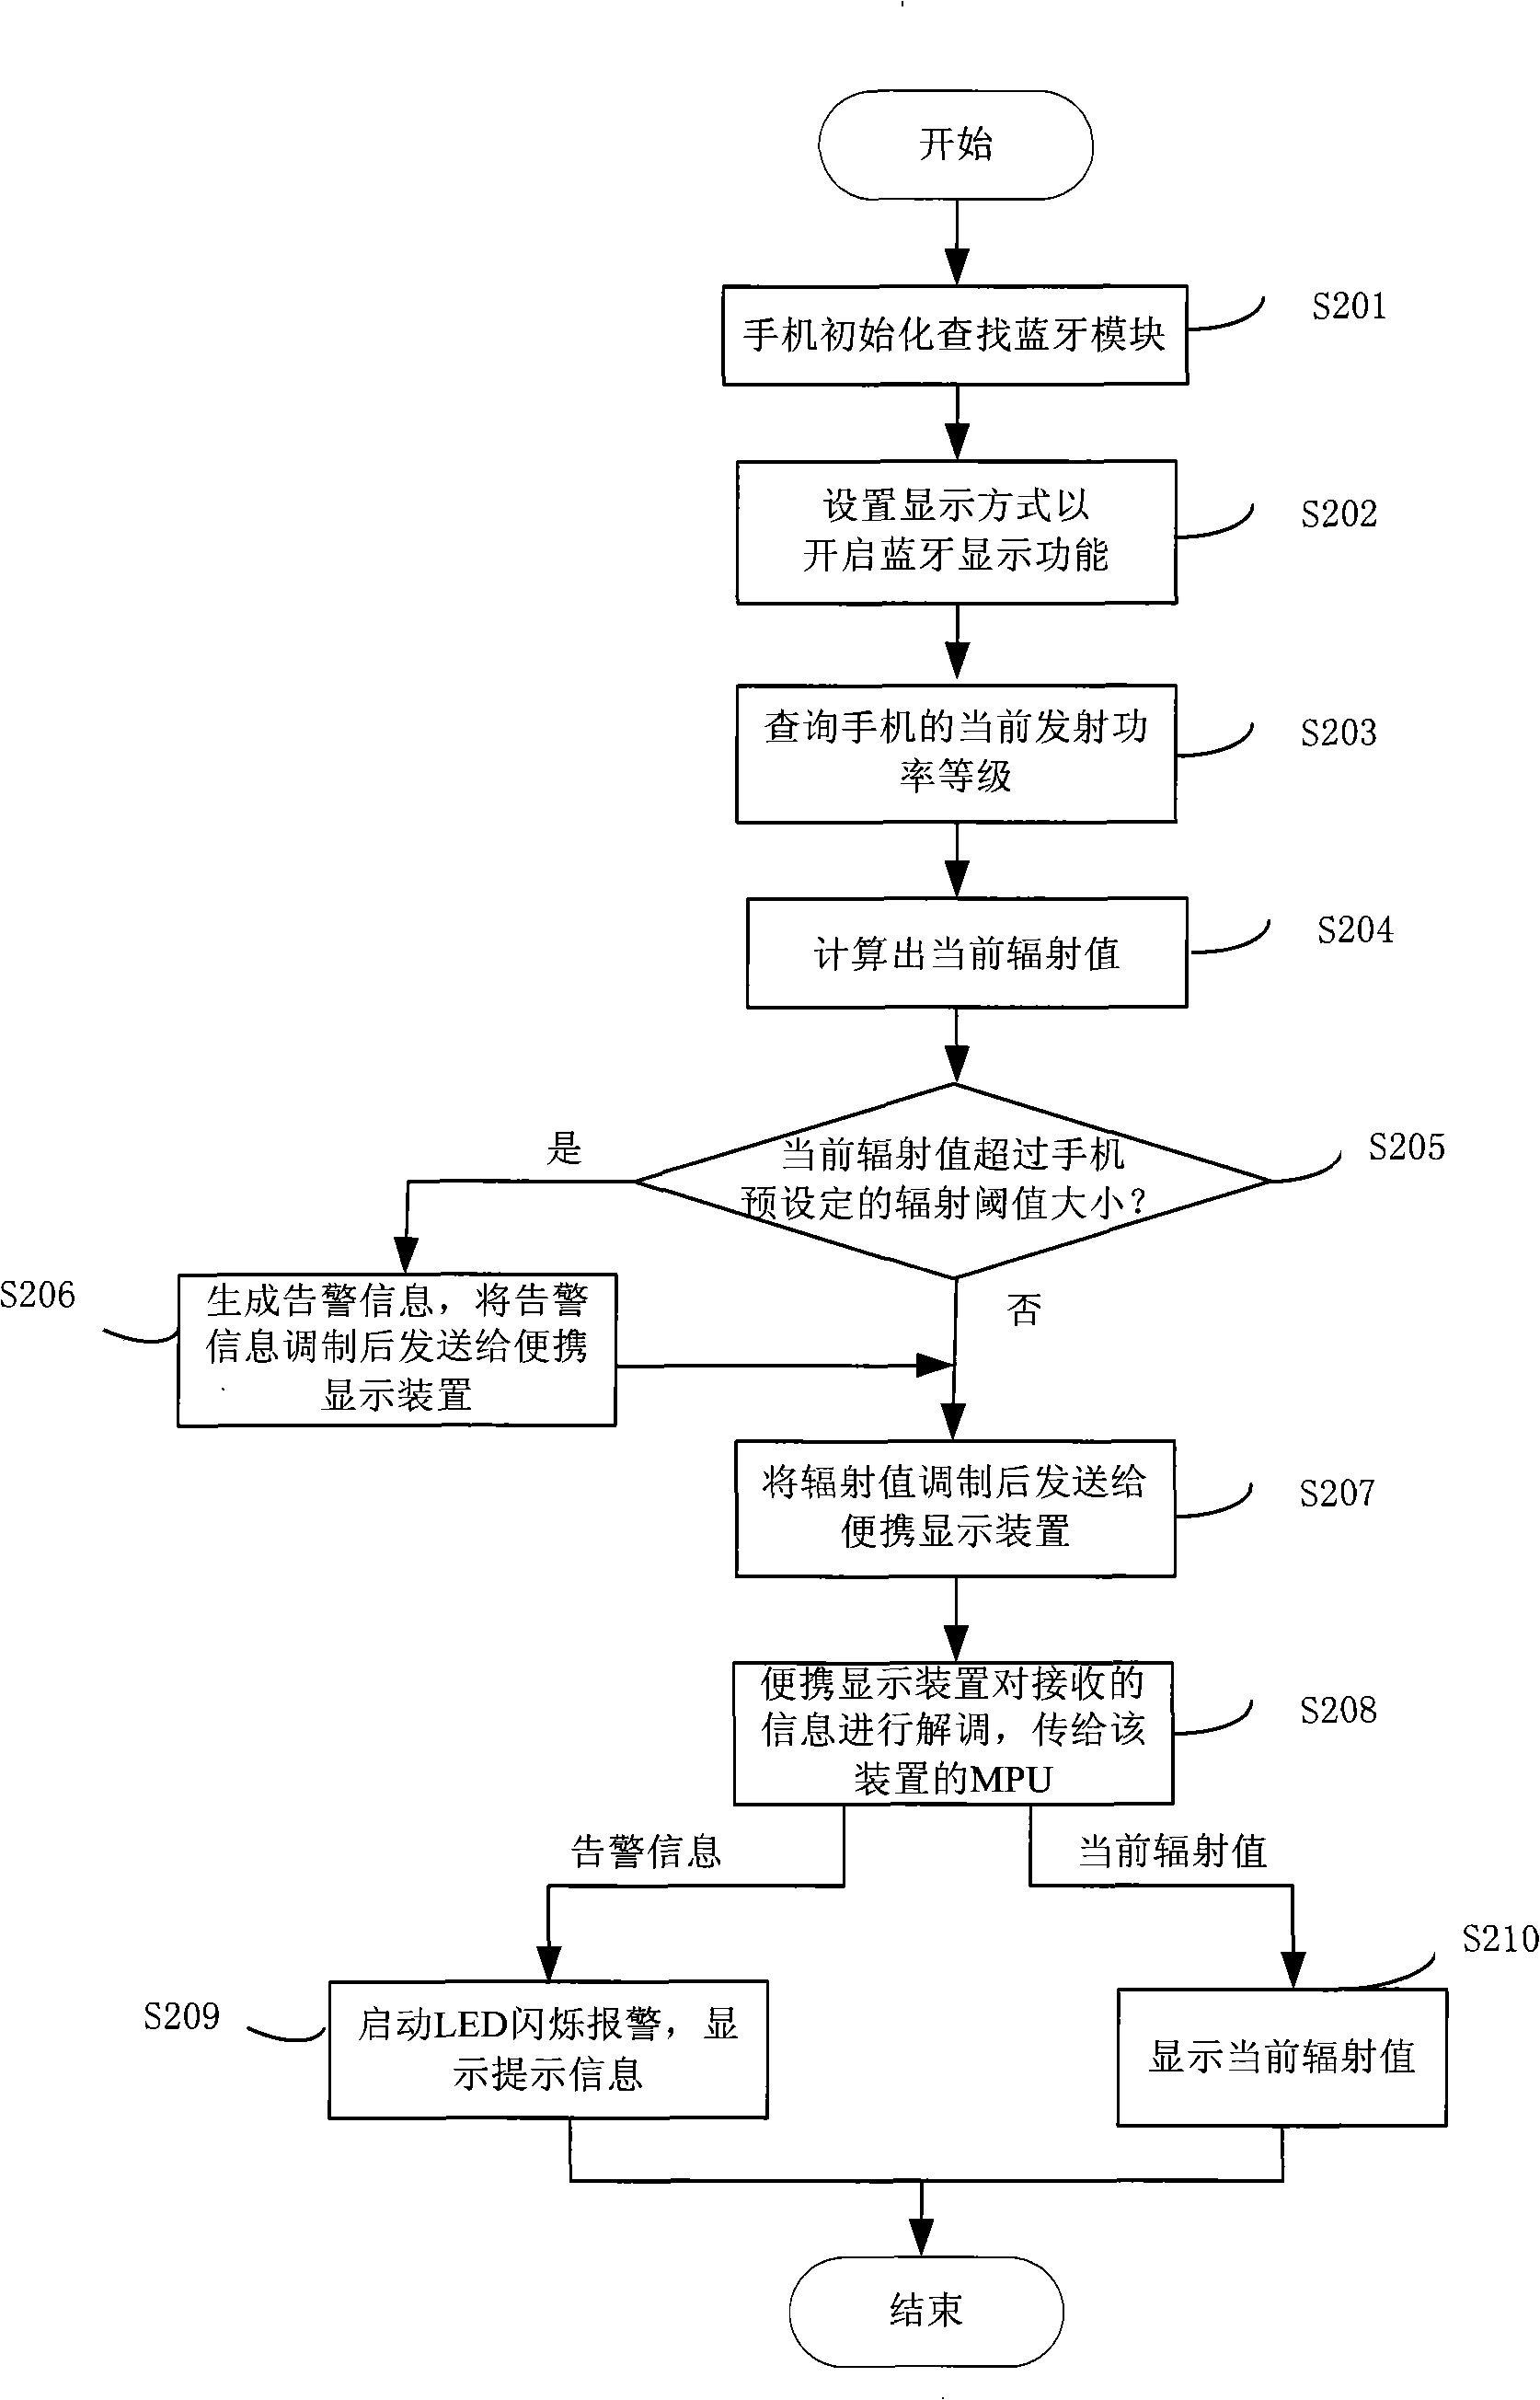 Apparatus and method for measuring mobile phone radiation